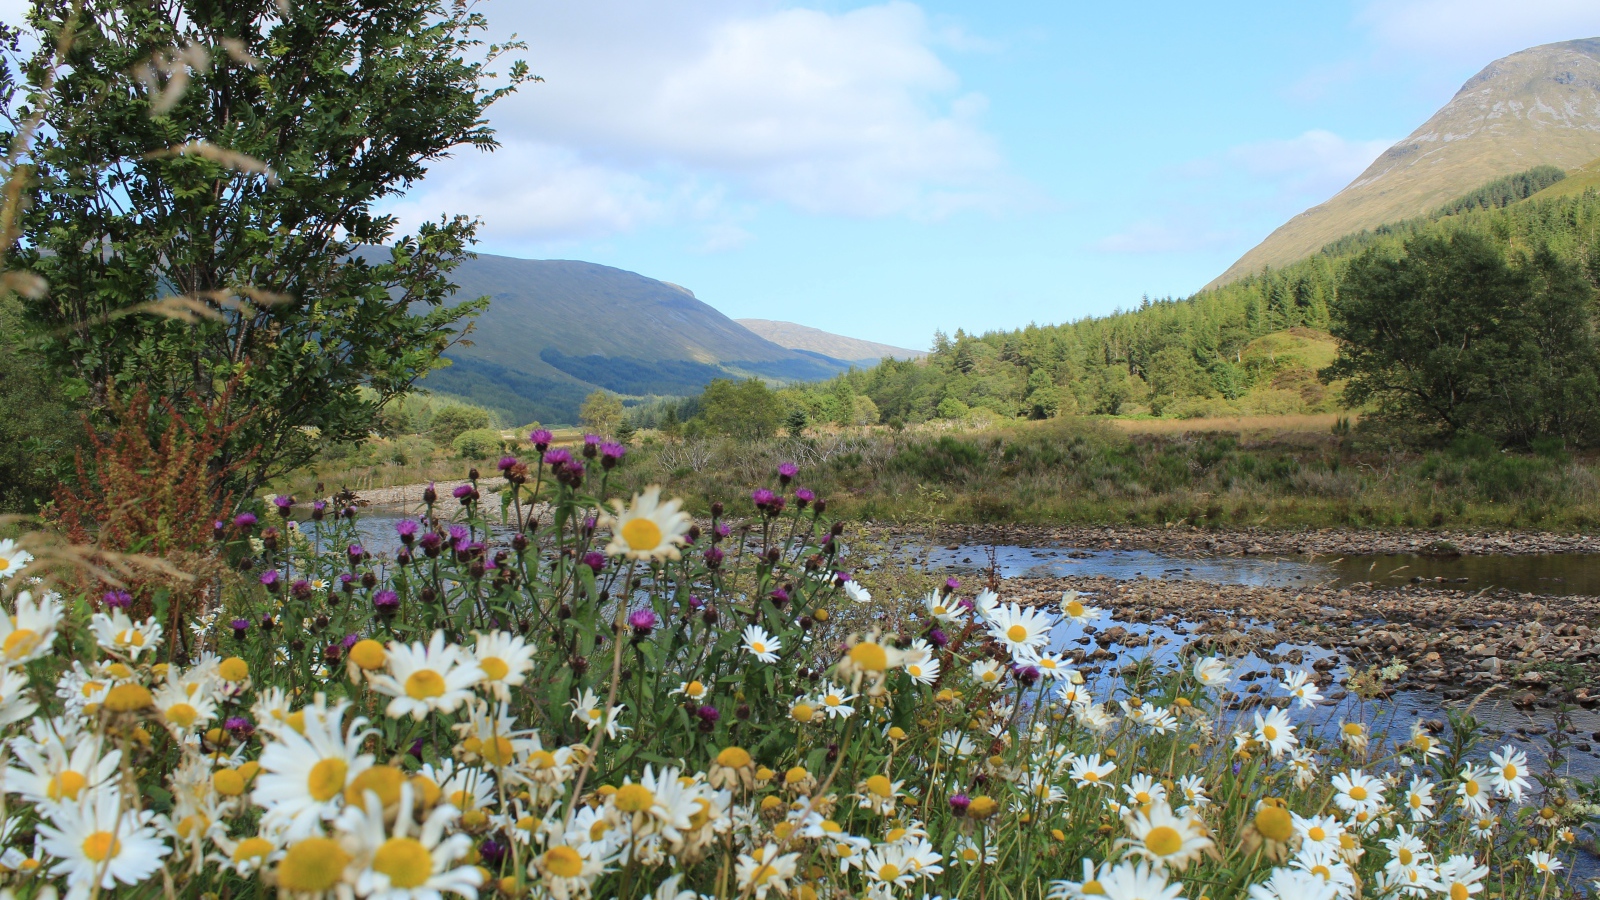 Field chamomile and thistle on the bank of a mountain river